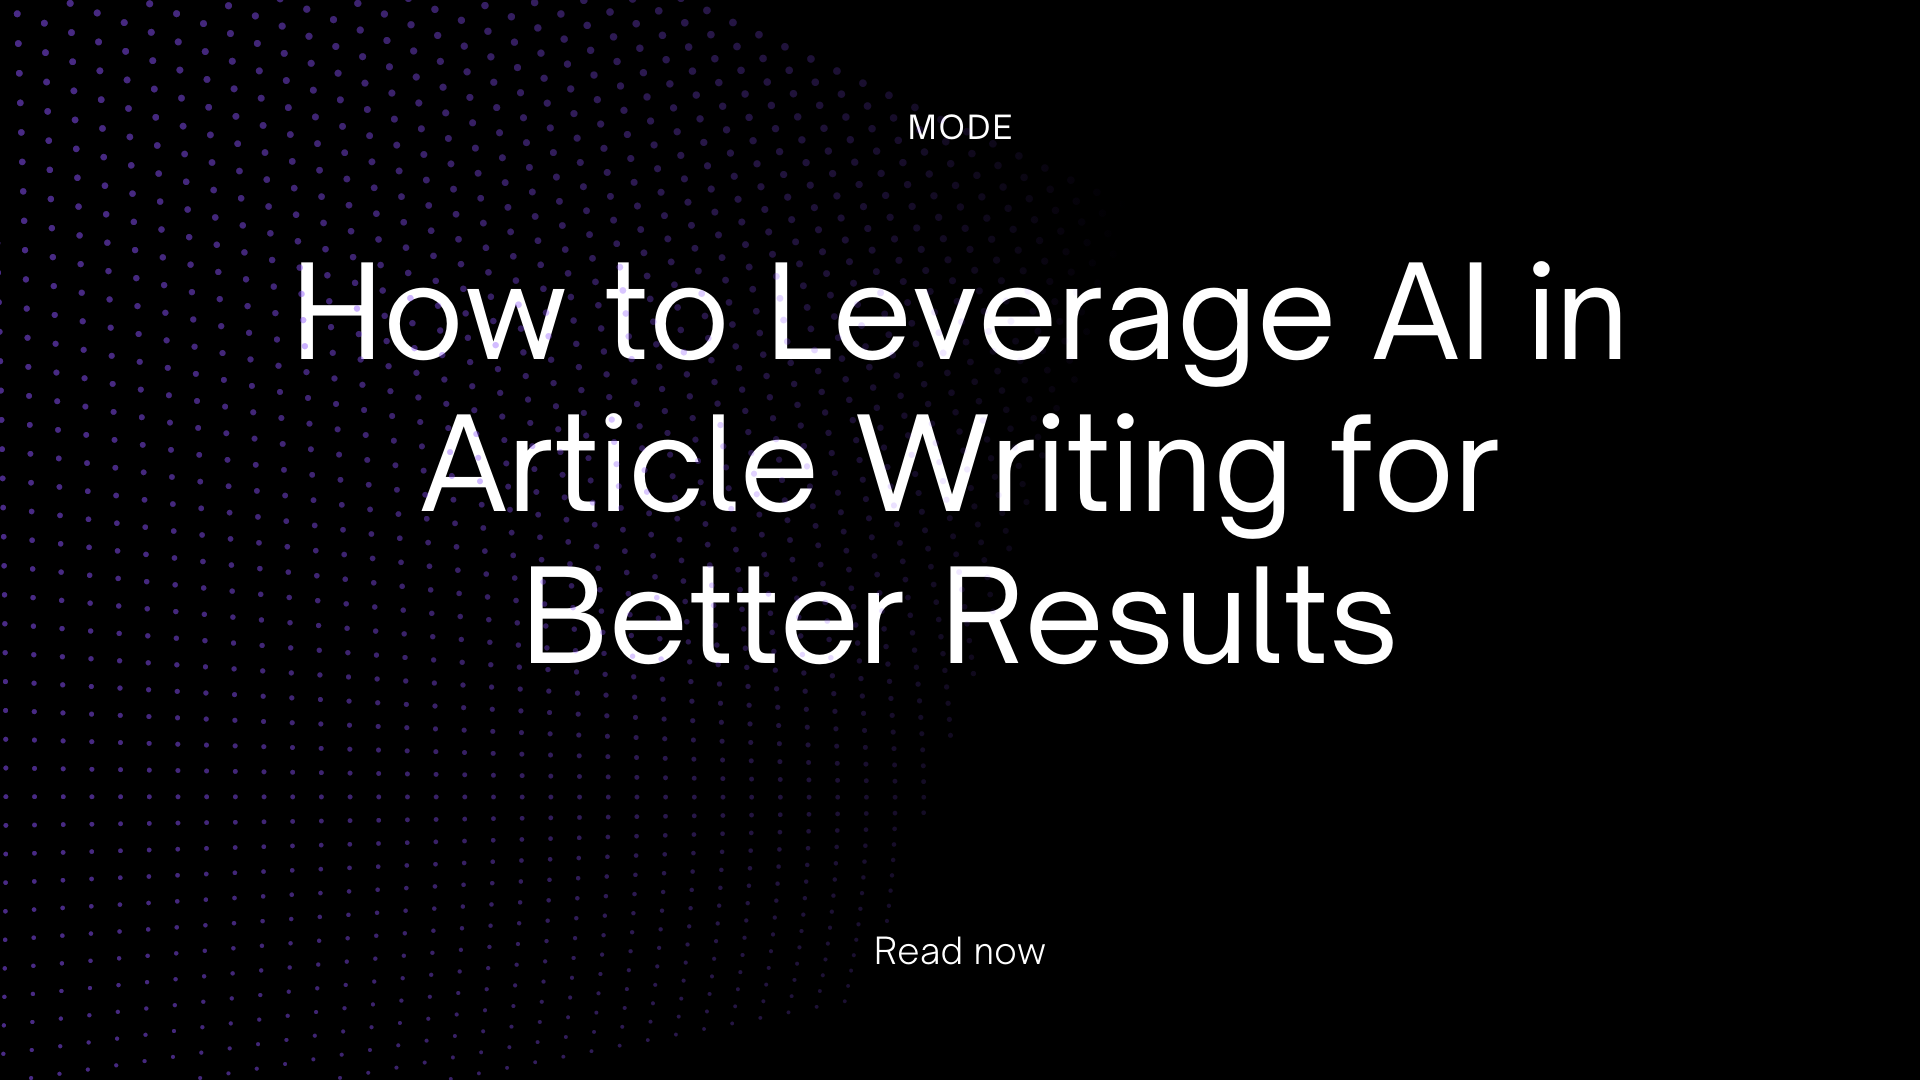 How to Leverage AI in Article Writing for Better Results